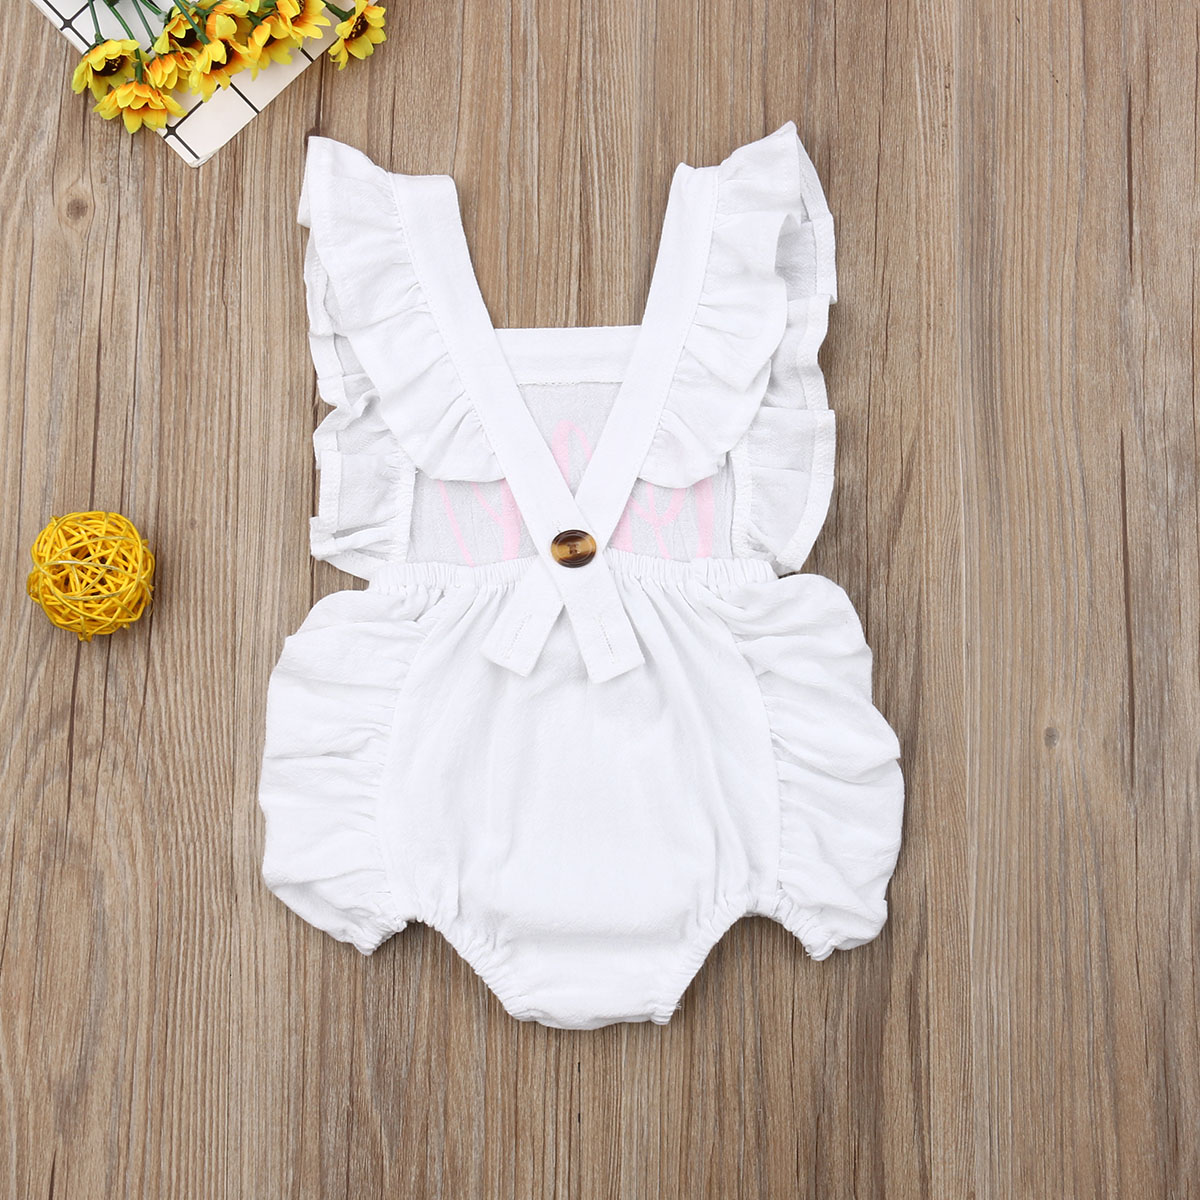 Pudcoco Newborn Baby Girl Clothes Sleeveless Solid Color ONE Print Cotton Romper Jumpsuit One-Piece Sunsuit Outfit Summer